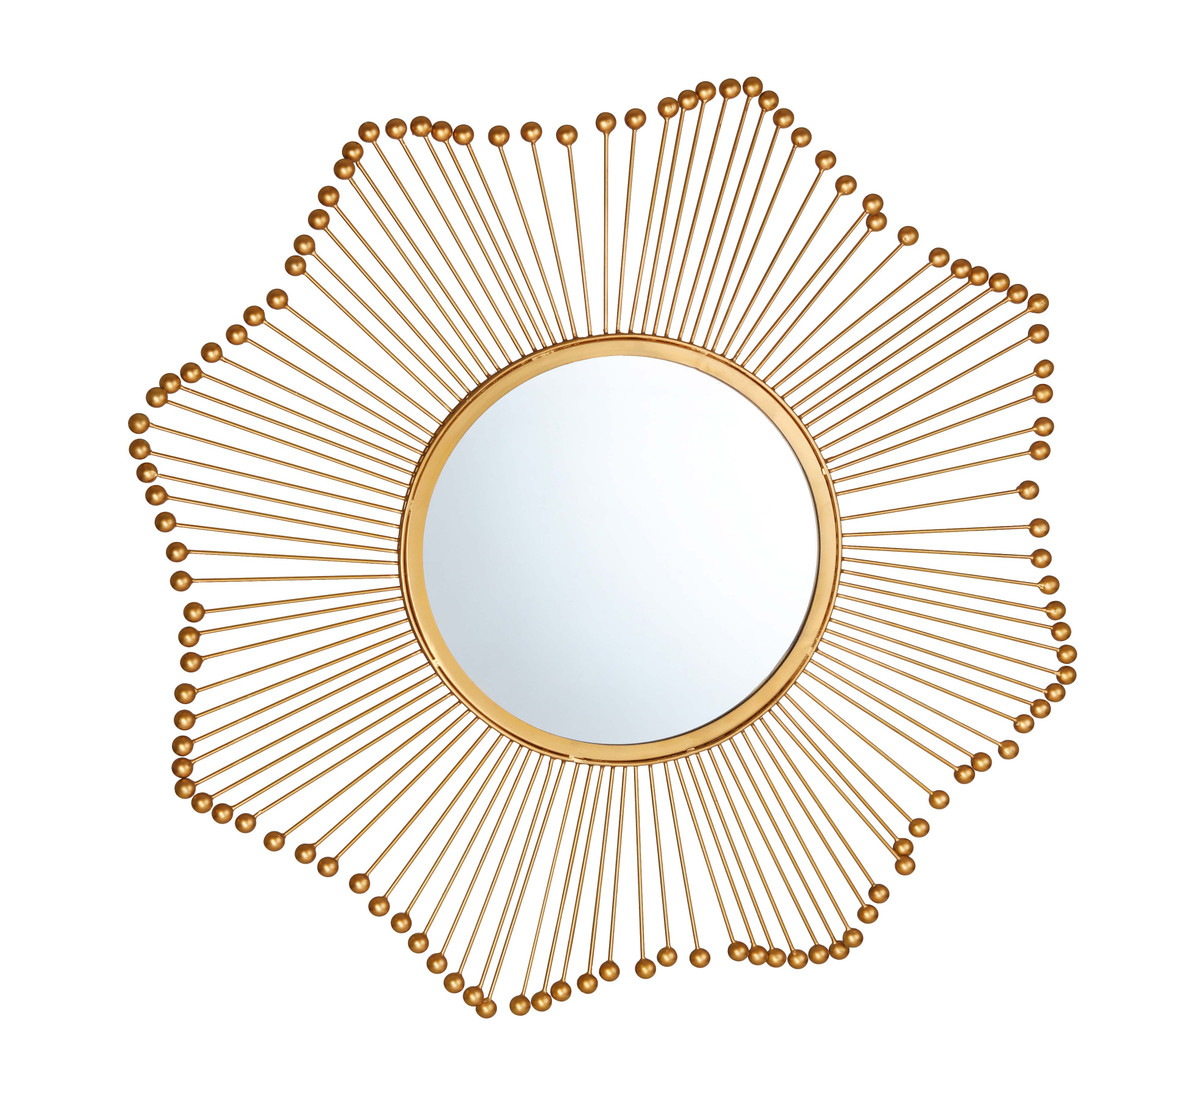 Tov-c18140 Ray Mirror Frame - Gold - 32 X 32 X 0.75 In.